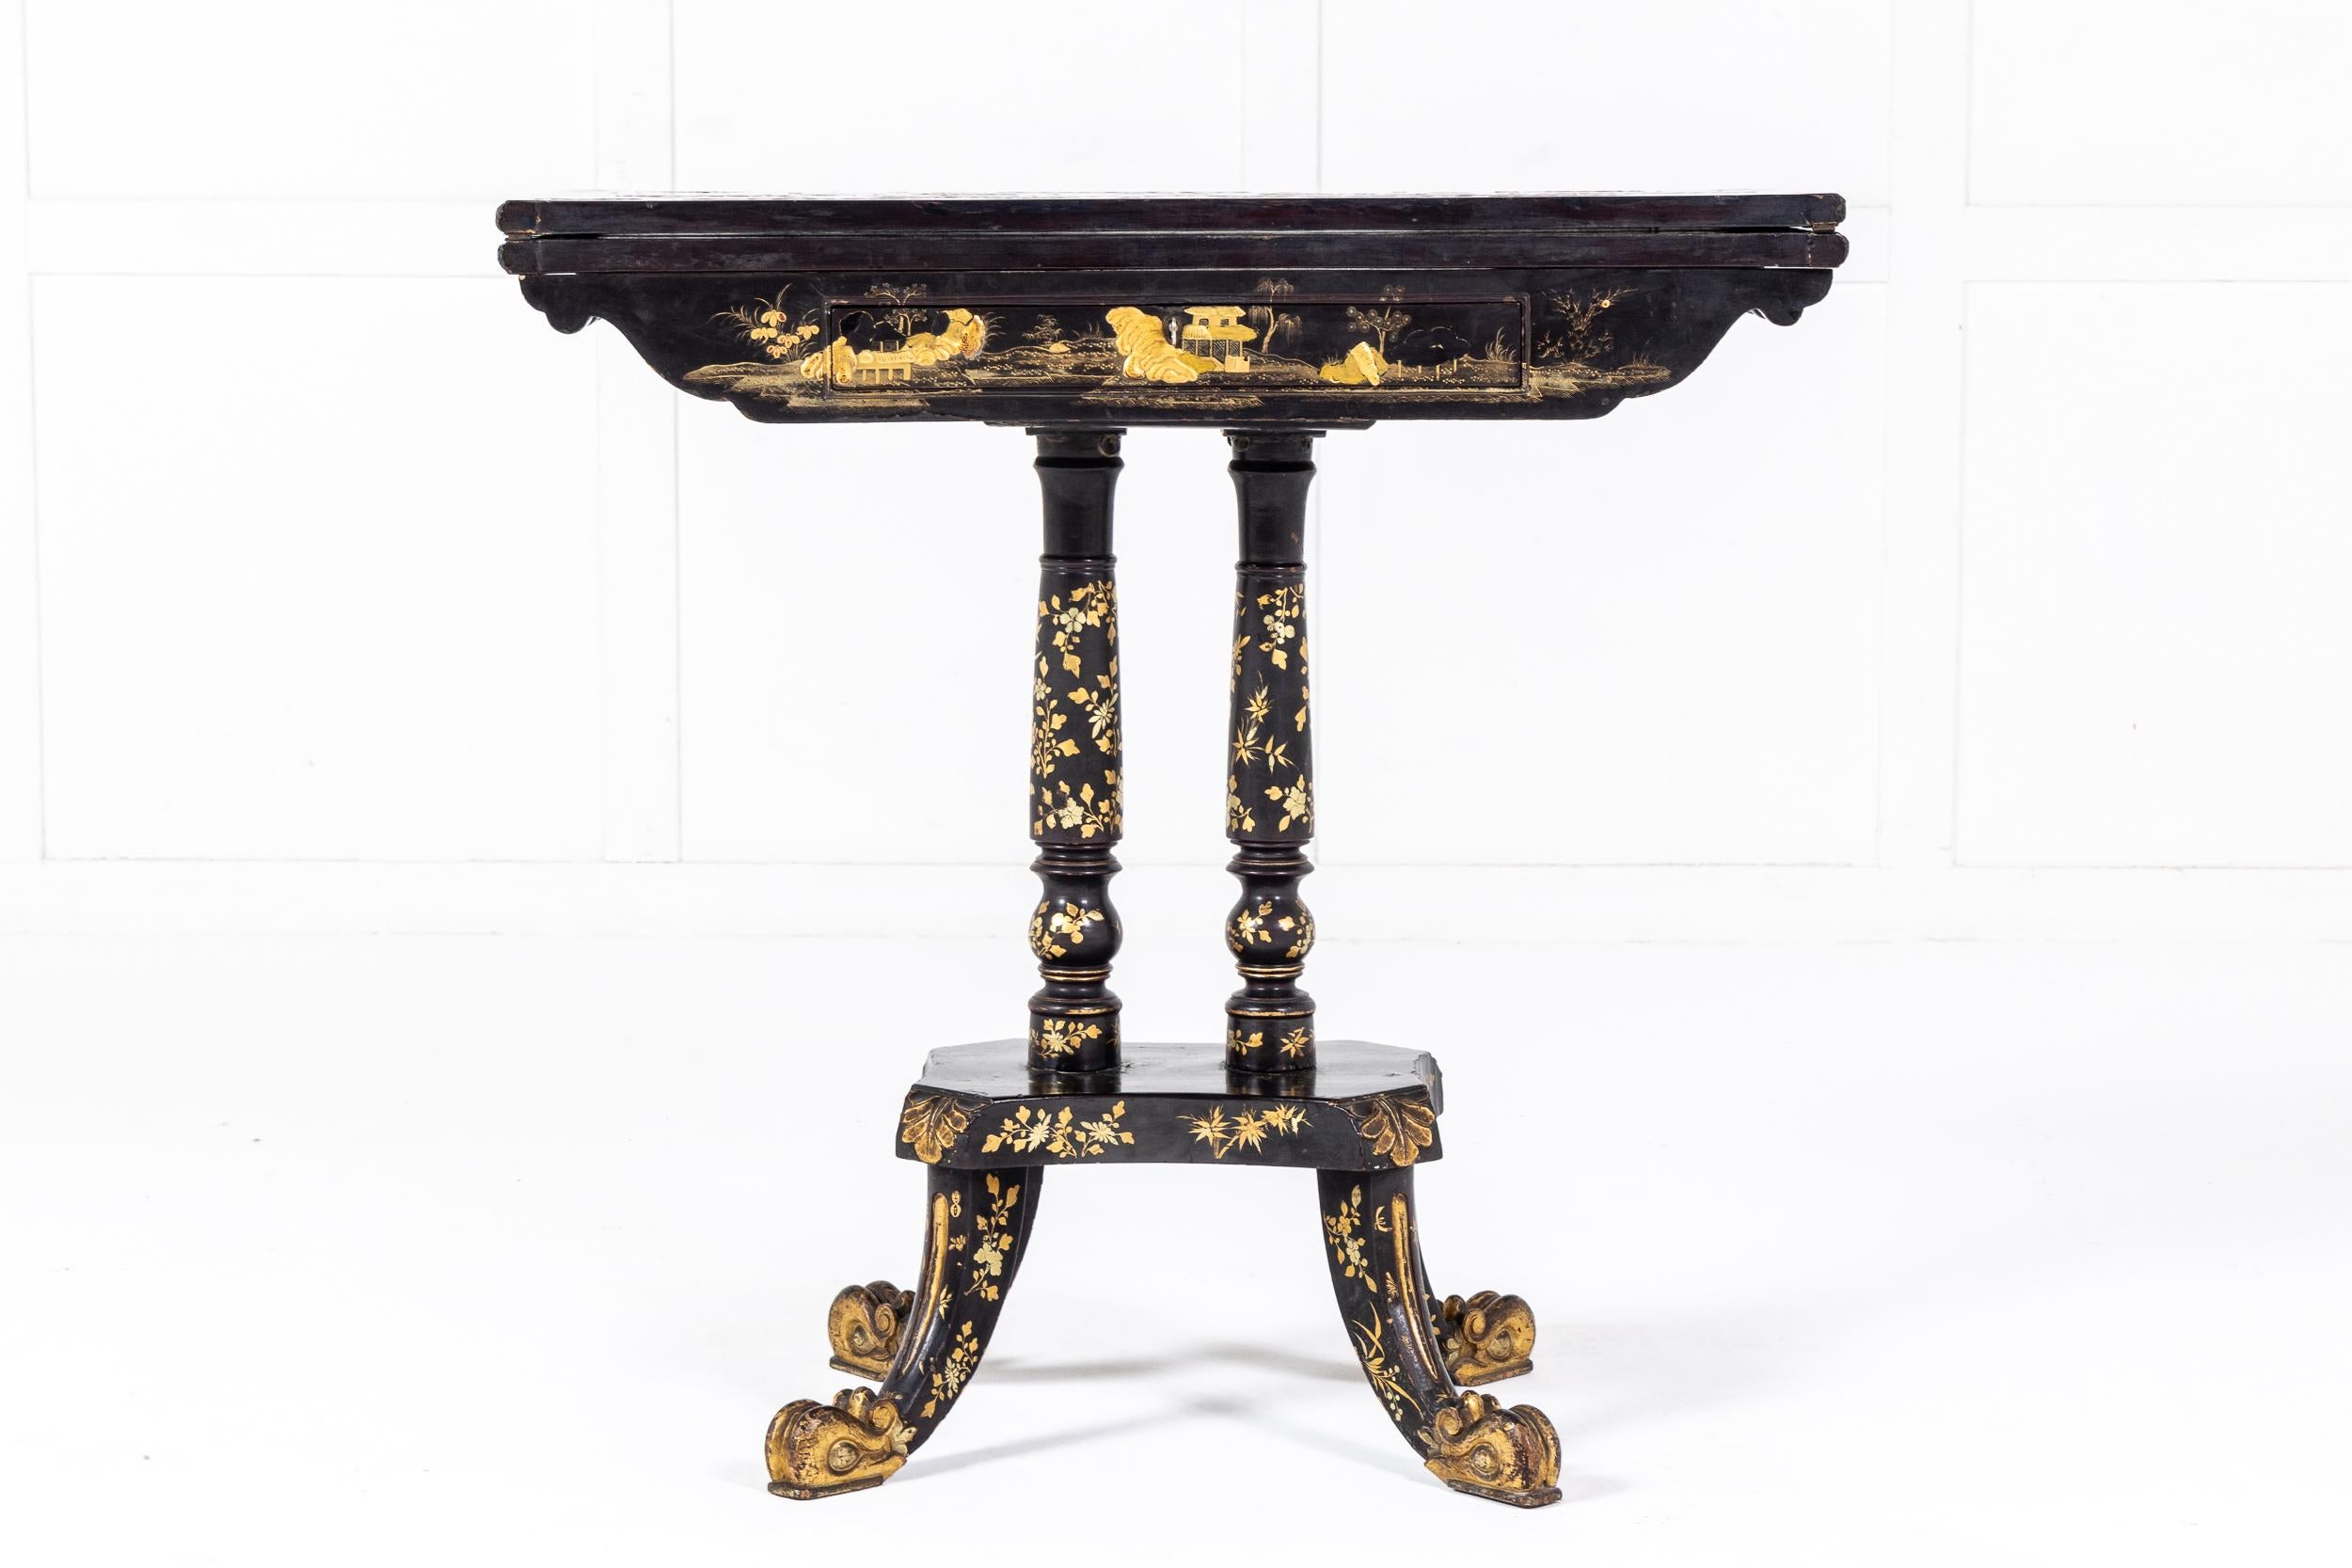 A Beautiful and Decorative Chinese Export Lacquer Games Table, c.1825. Probably Based on an English Regency Model and Made for the British Market.

This fine table employs the usual fold-over top but is supported on two turned columns and a